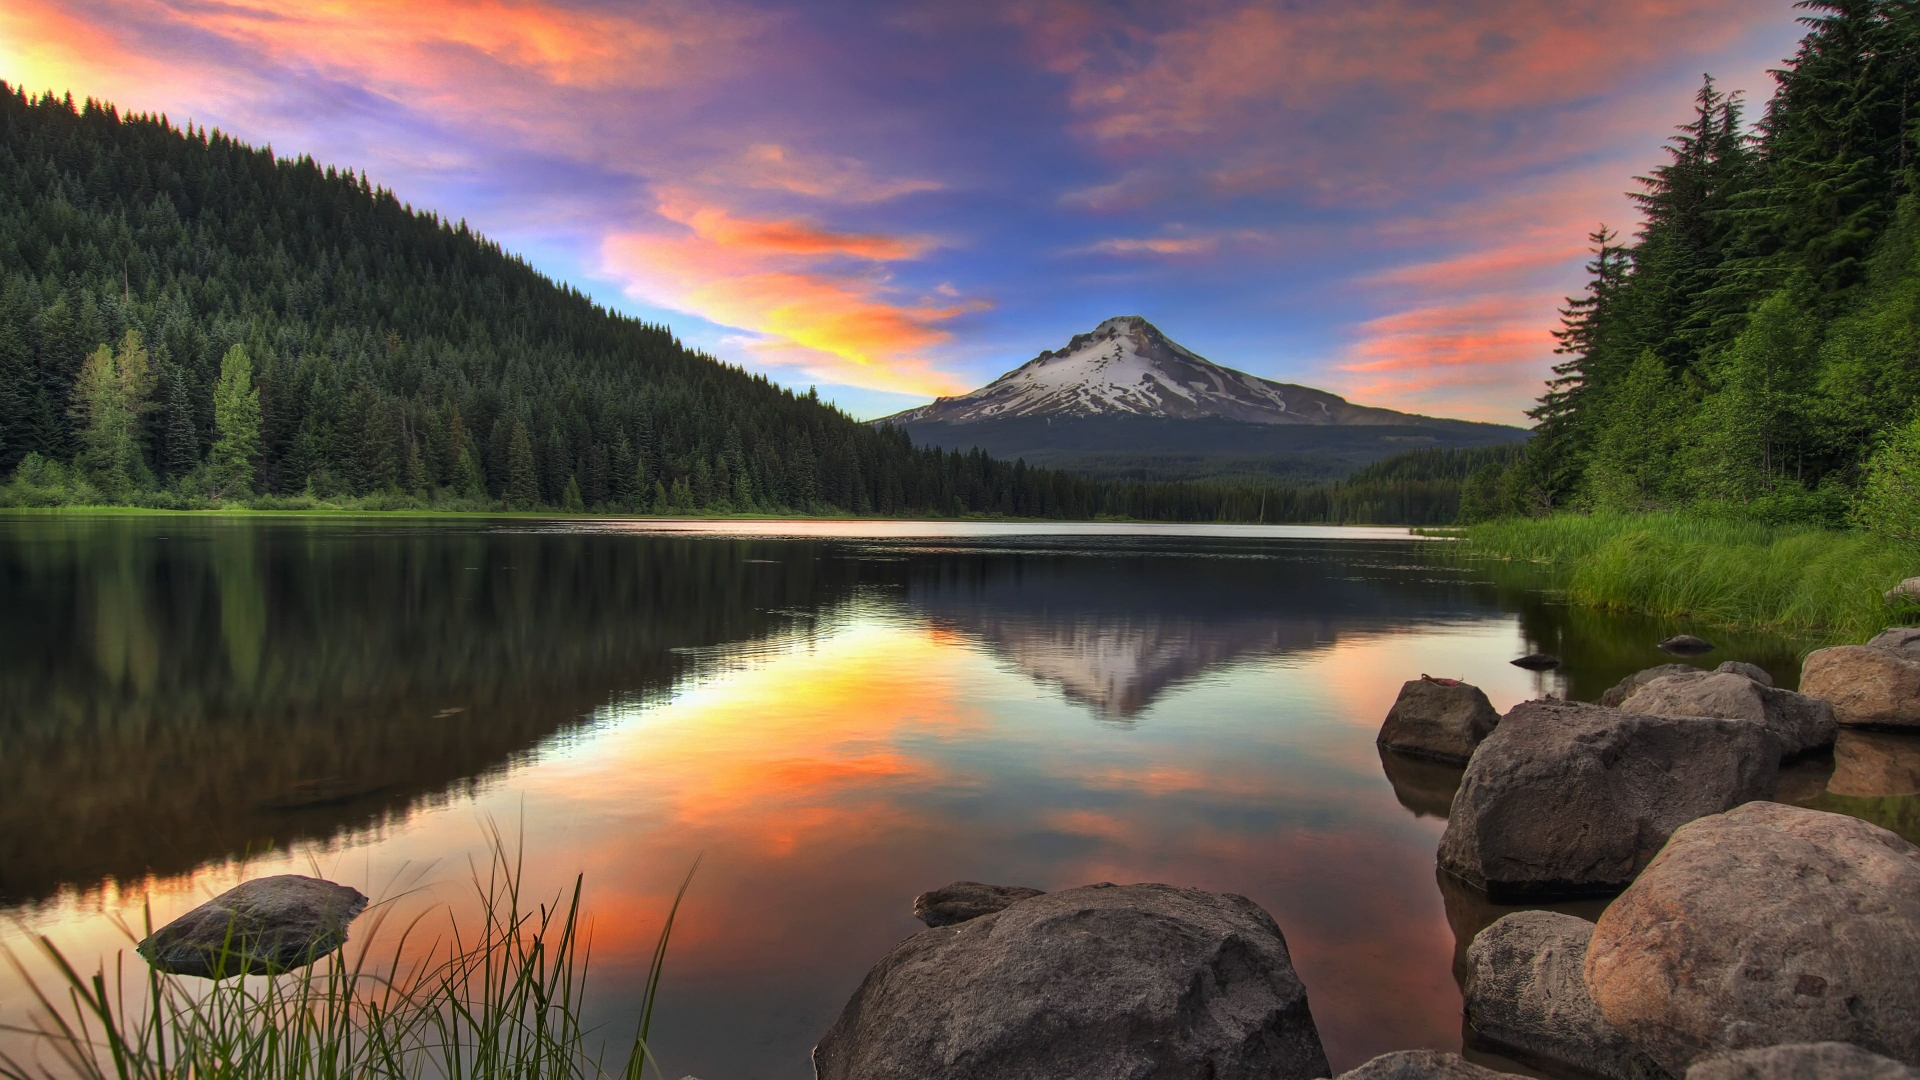 Mount Hood Trees Rocks Water Nature Mountains Clouds Reflection Sky 1920x1080